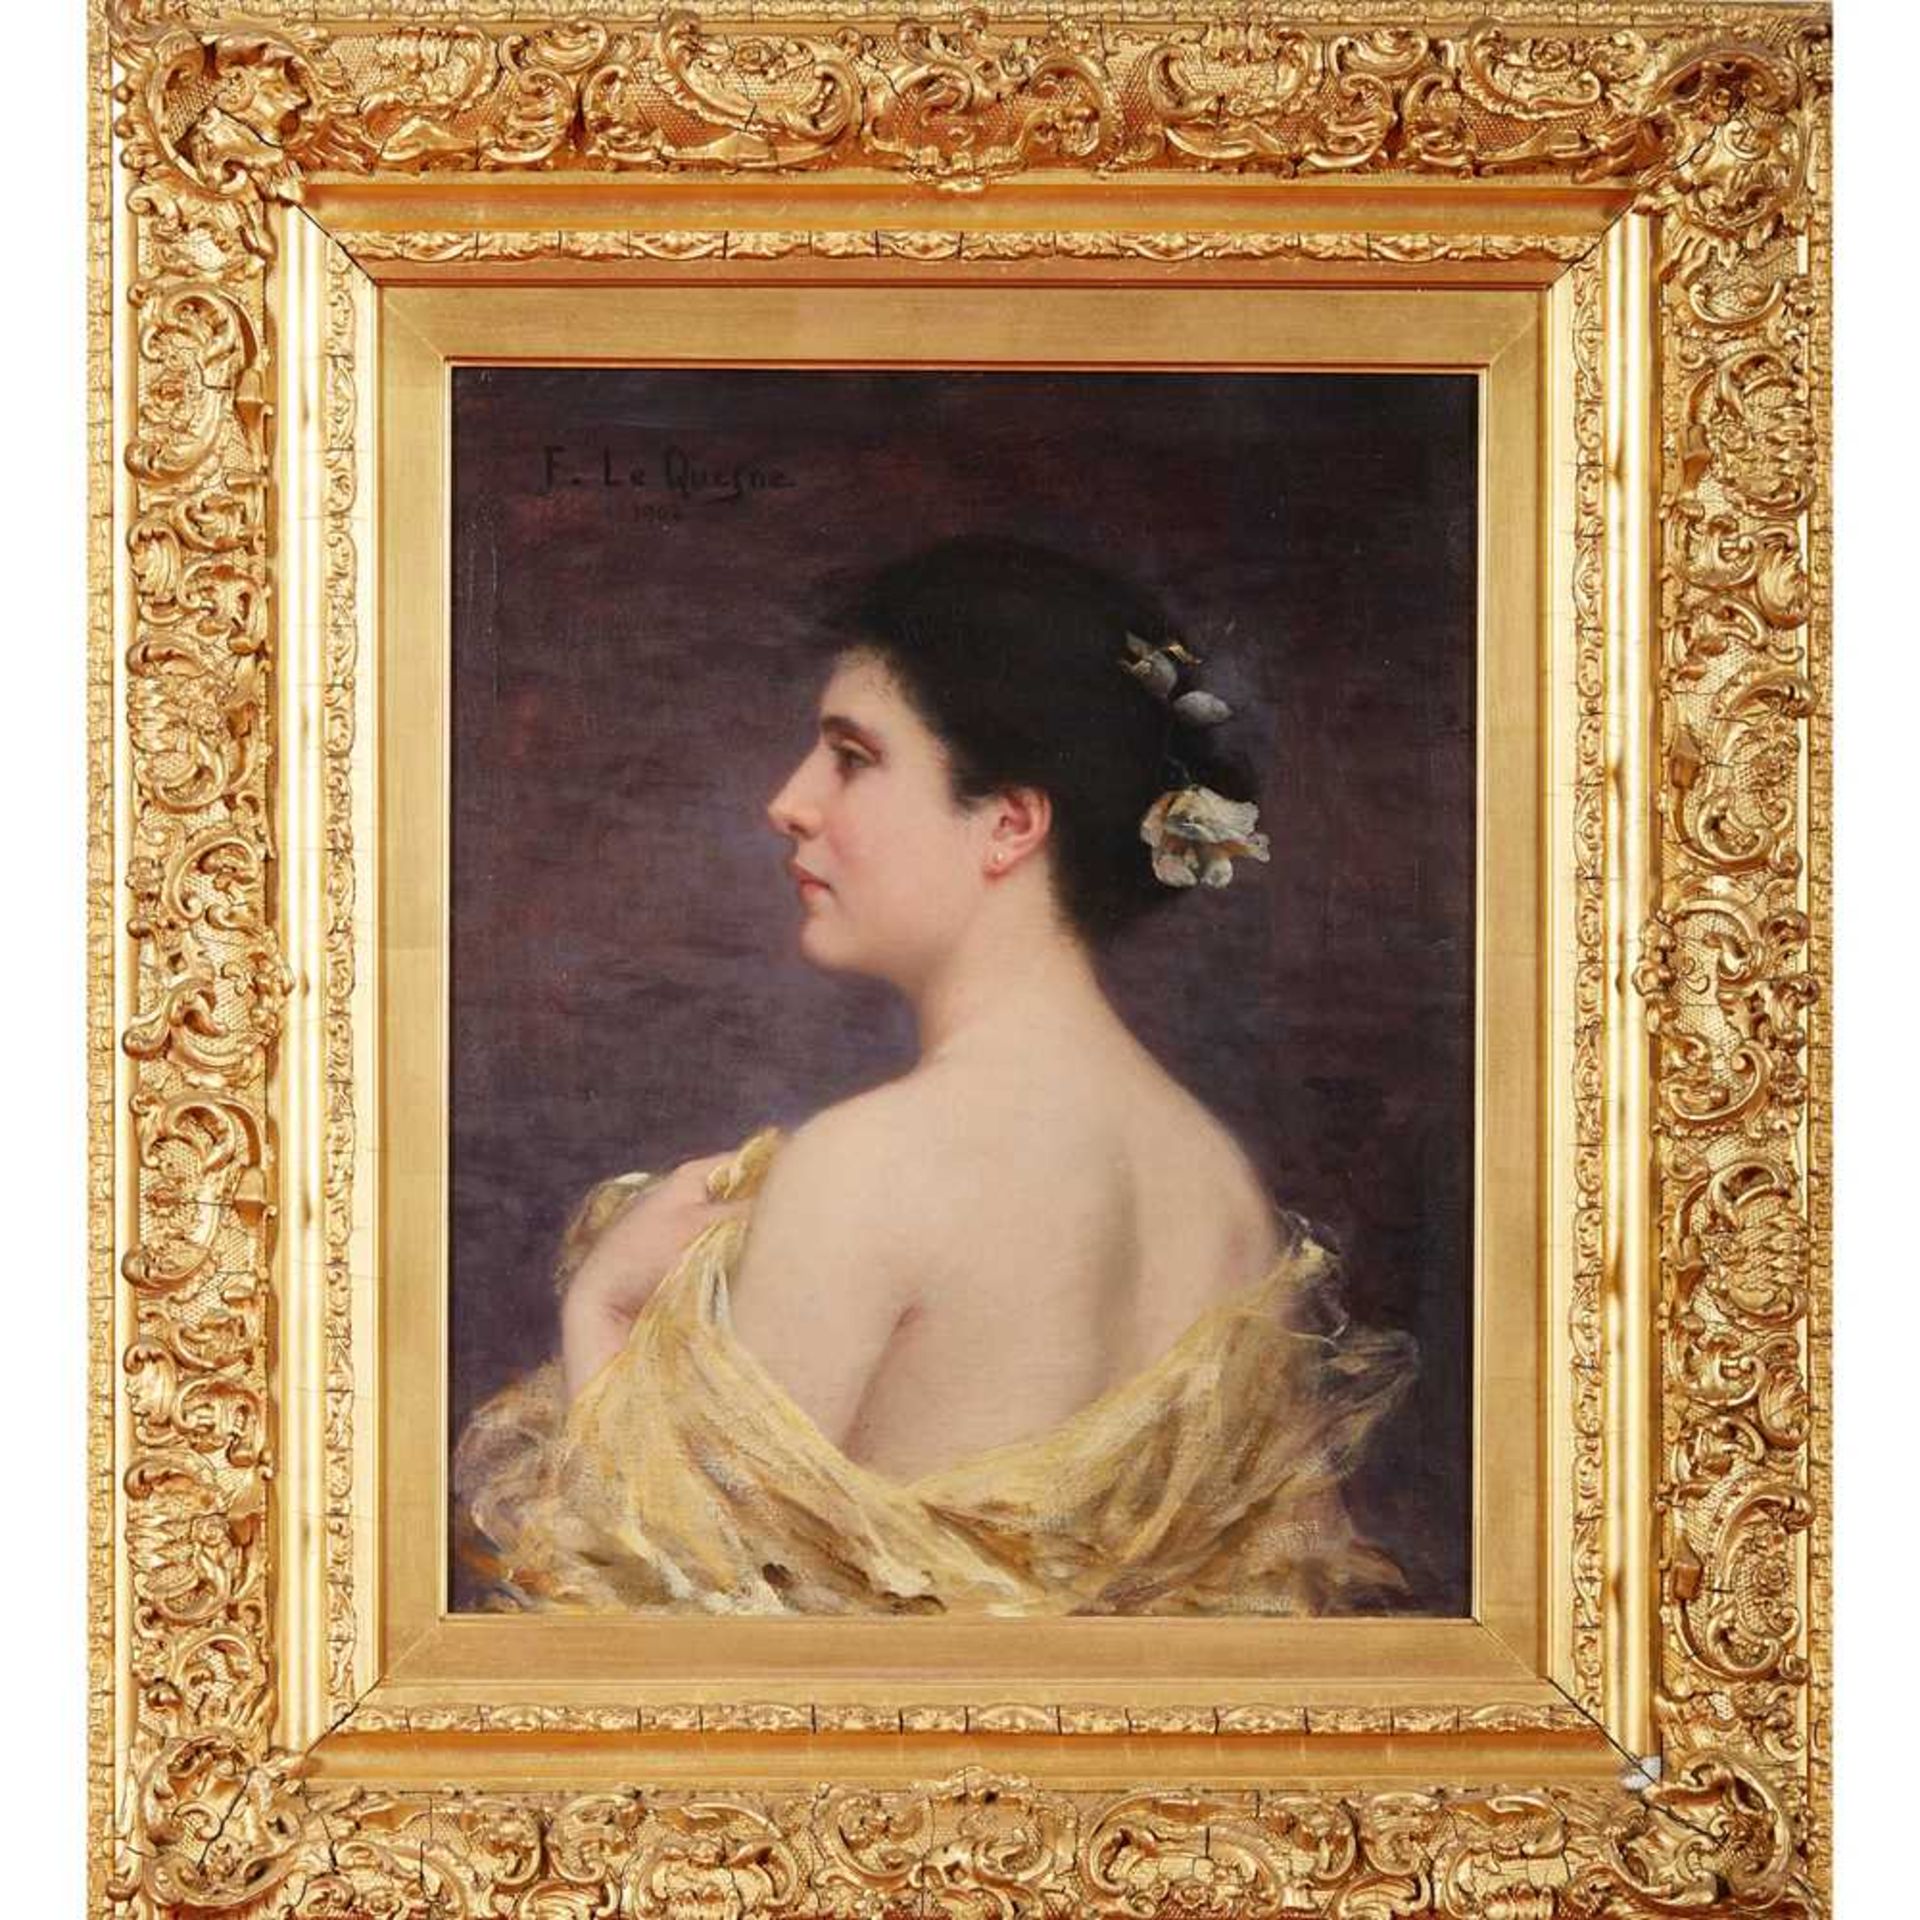 FERNAND LE QUESNE (FRENCH 1856-1918) STUDY OF A YOUNG BEAUTY IN PROFILE - Image 2 of 3